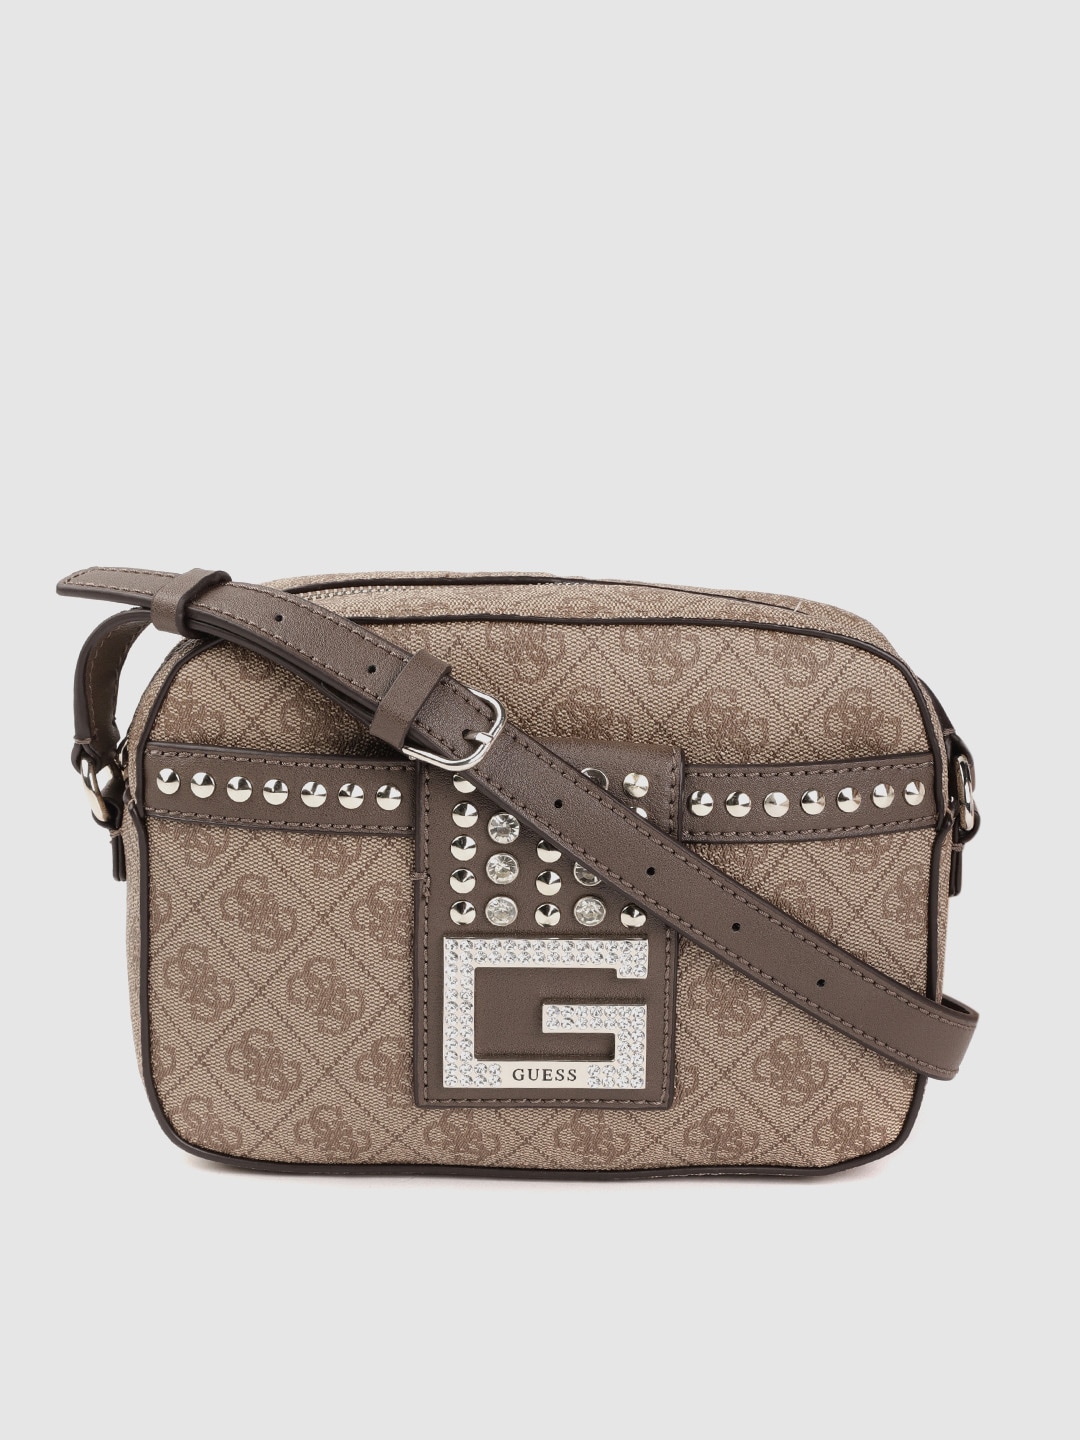 GUESS Beige Brand Logo Printed Structured Sling Bag with Embellished Detail Price in India